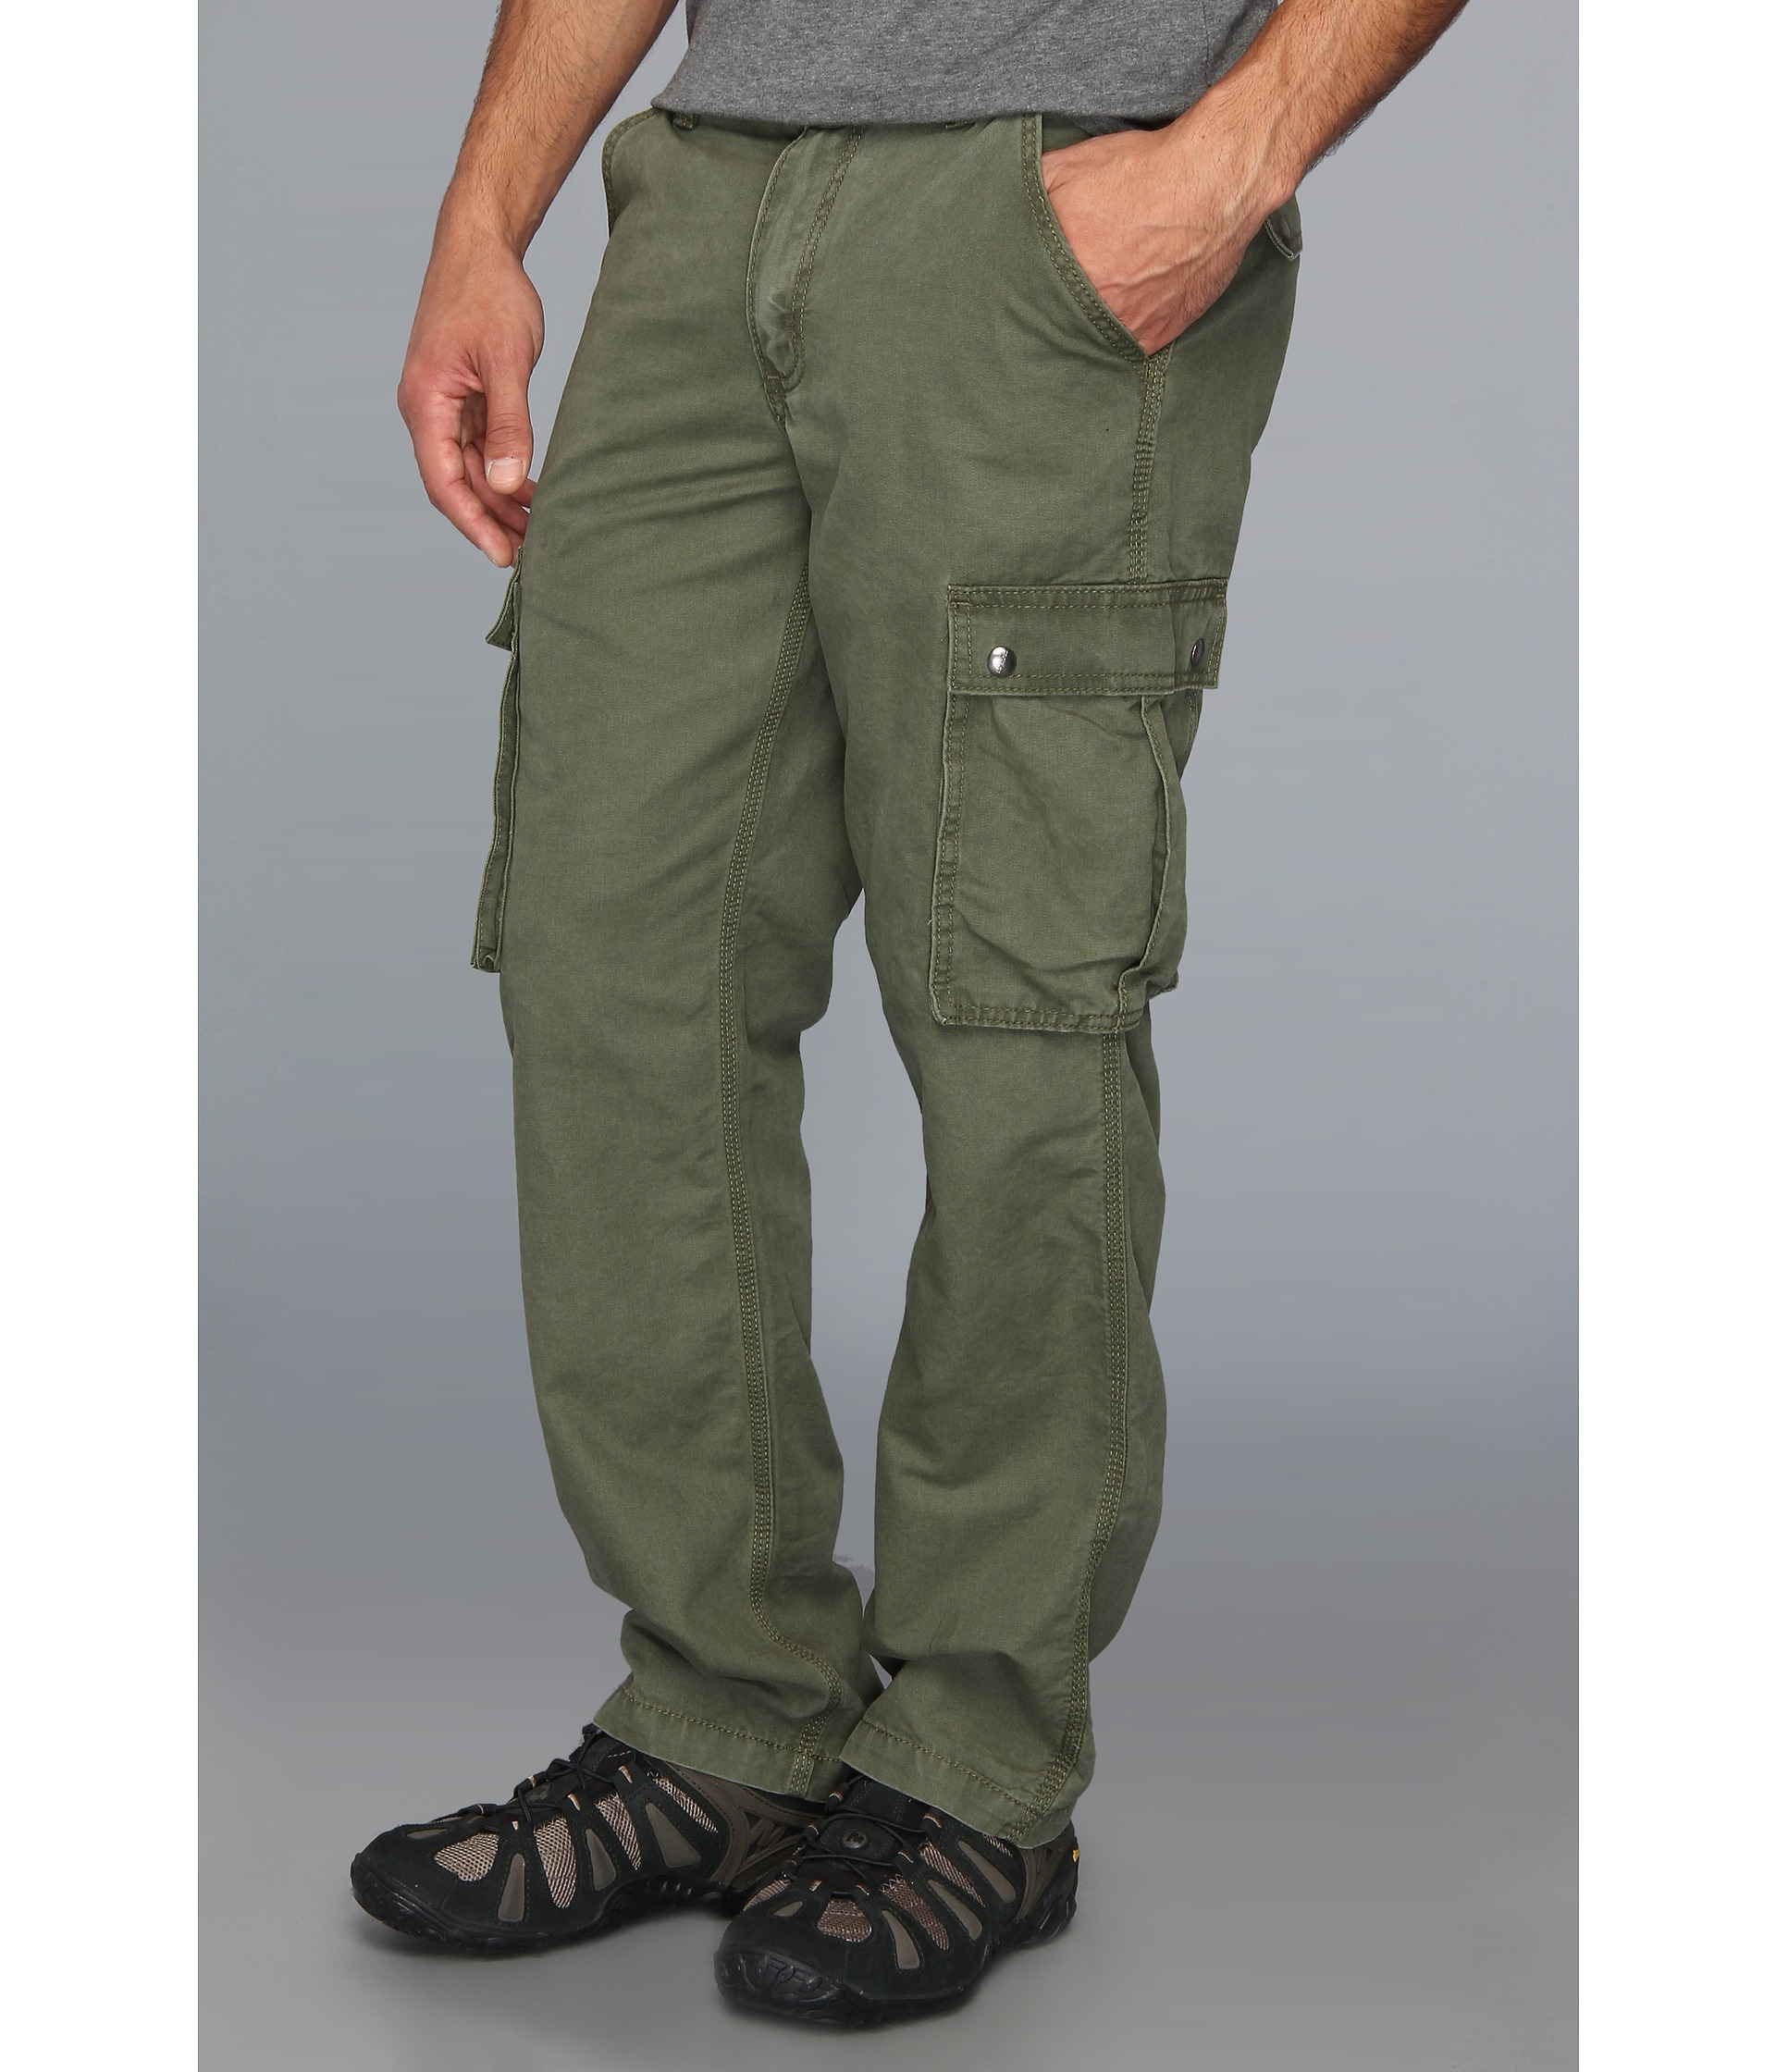 Lyst - Carhartt Rugged Cargo Pant in Green for Men